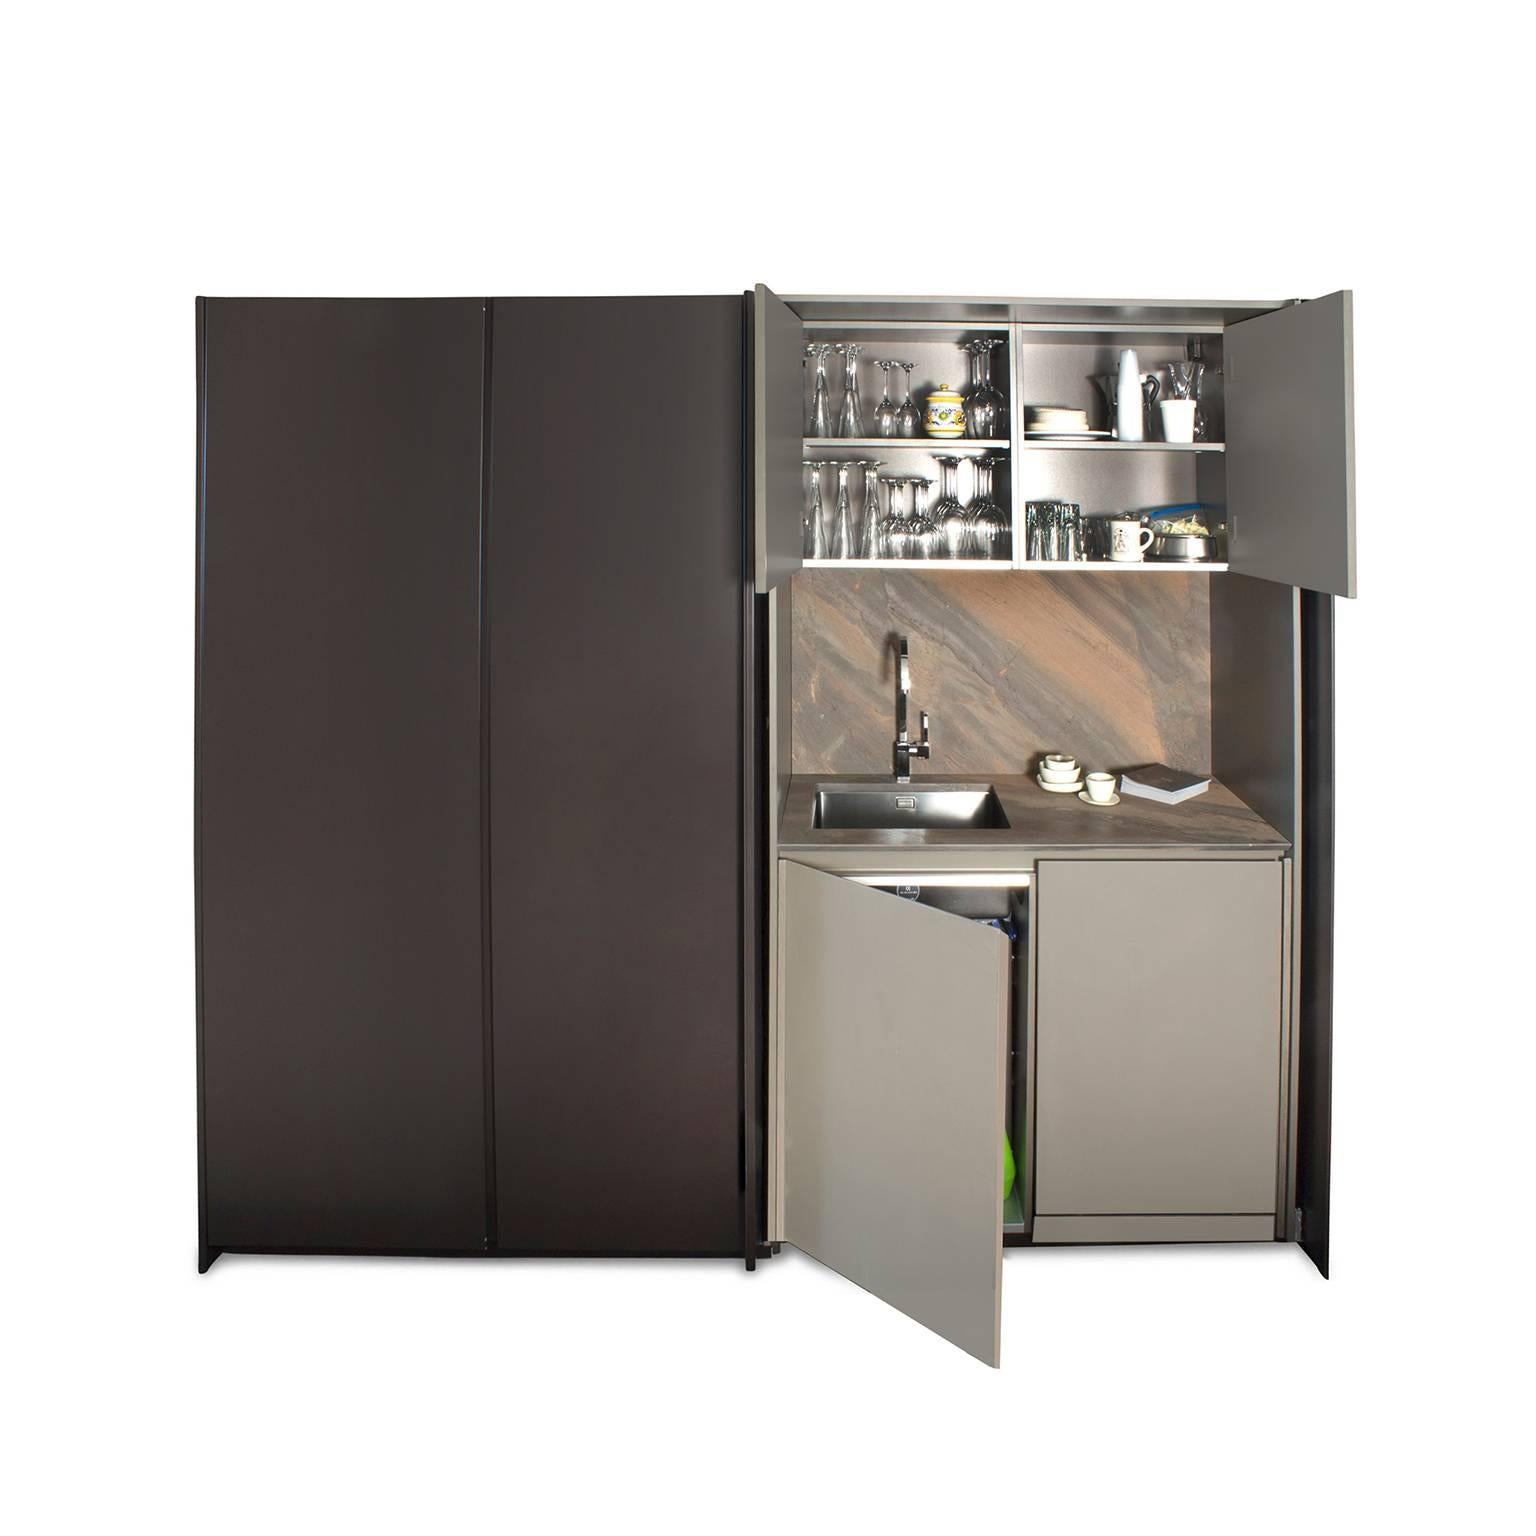 Viva is more than just a kitchen cabinet, it’s a program that goes beyond the traditional idea of kitchens. Pantry with retractable Hawa doors. Tall cabinets finish in Matte Brown Lacquer with pull-out chrome baskets. Double Ovens by Foster. Base